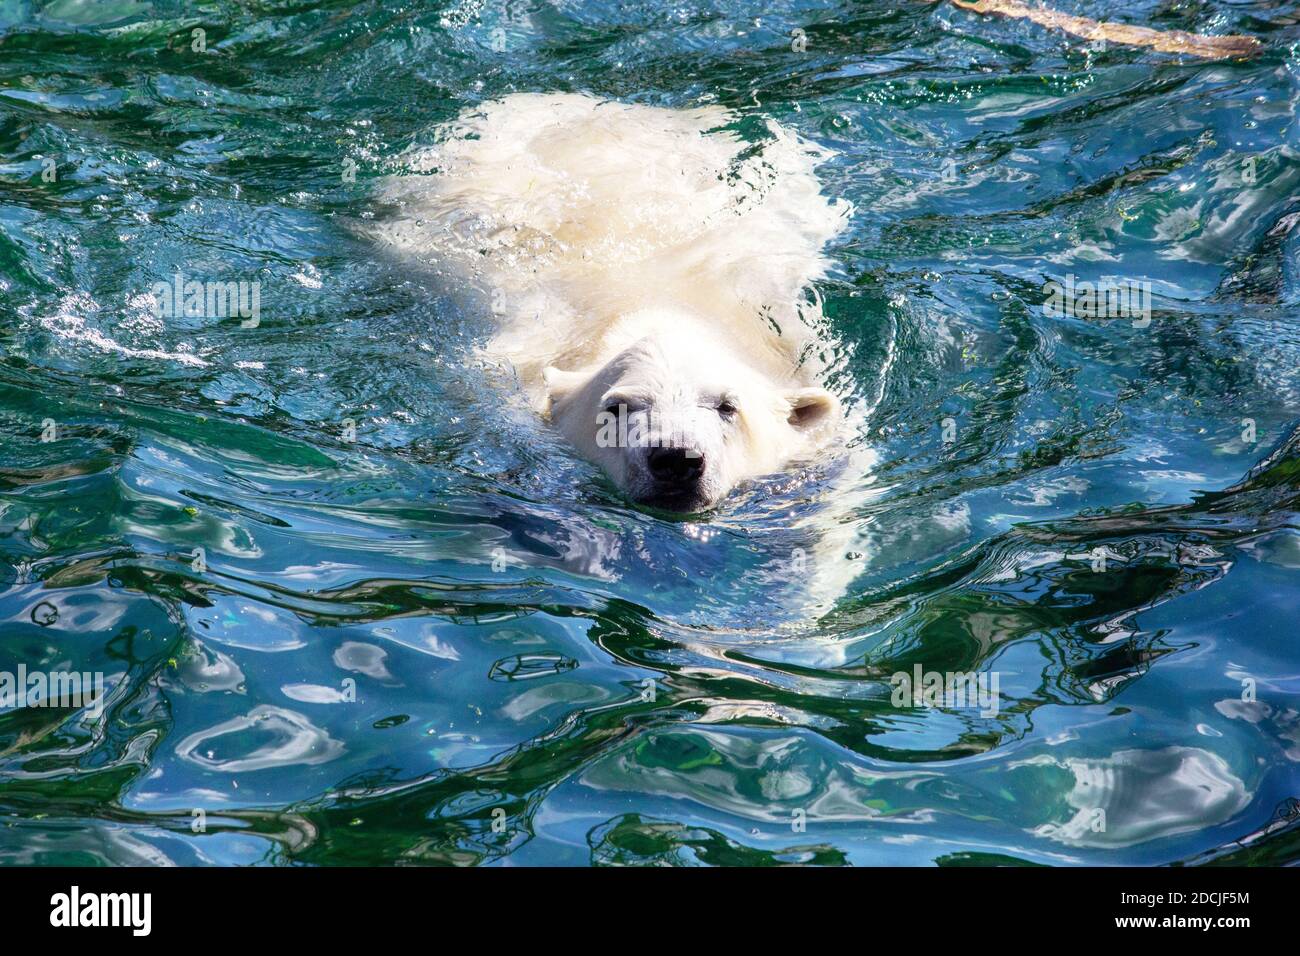 Front view of a young polar bear while swimming, scientific name Ursus maritimus Stock Photo